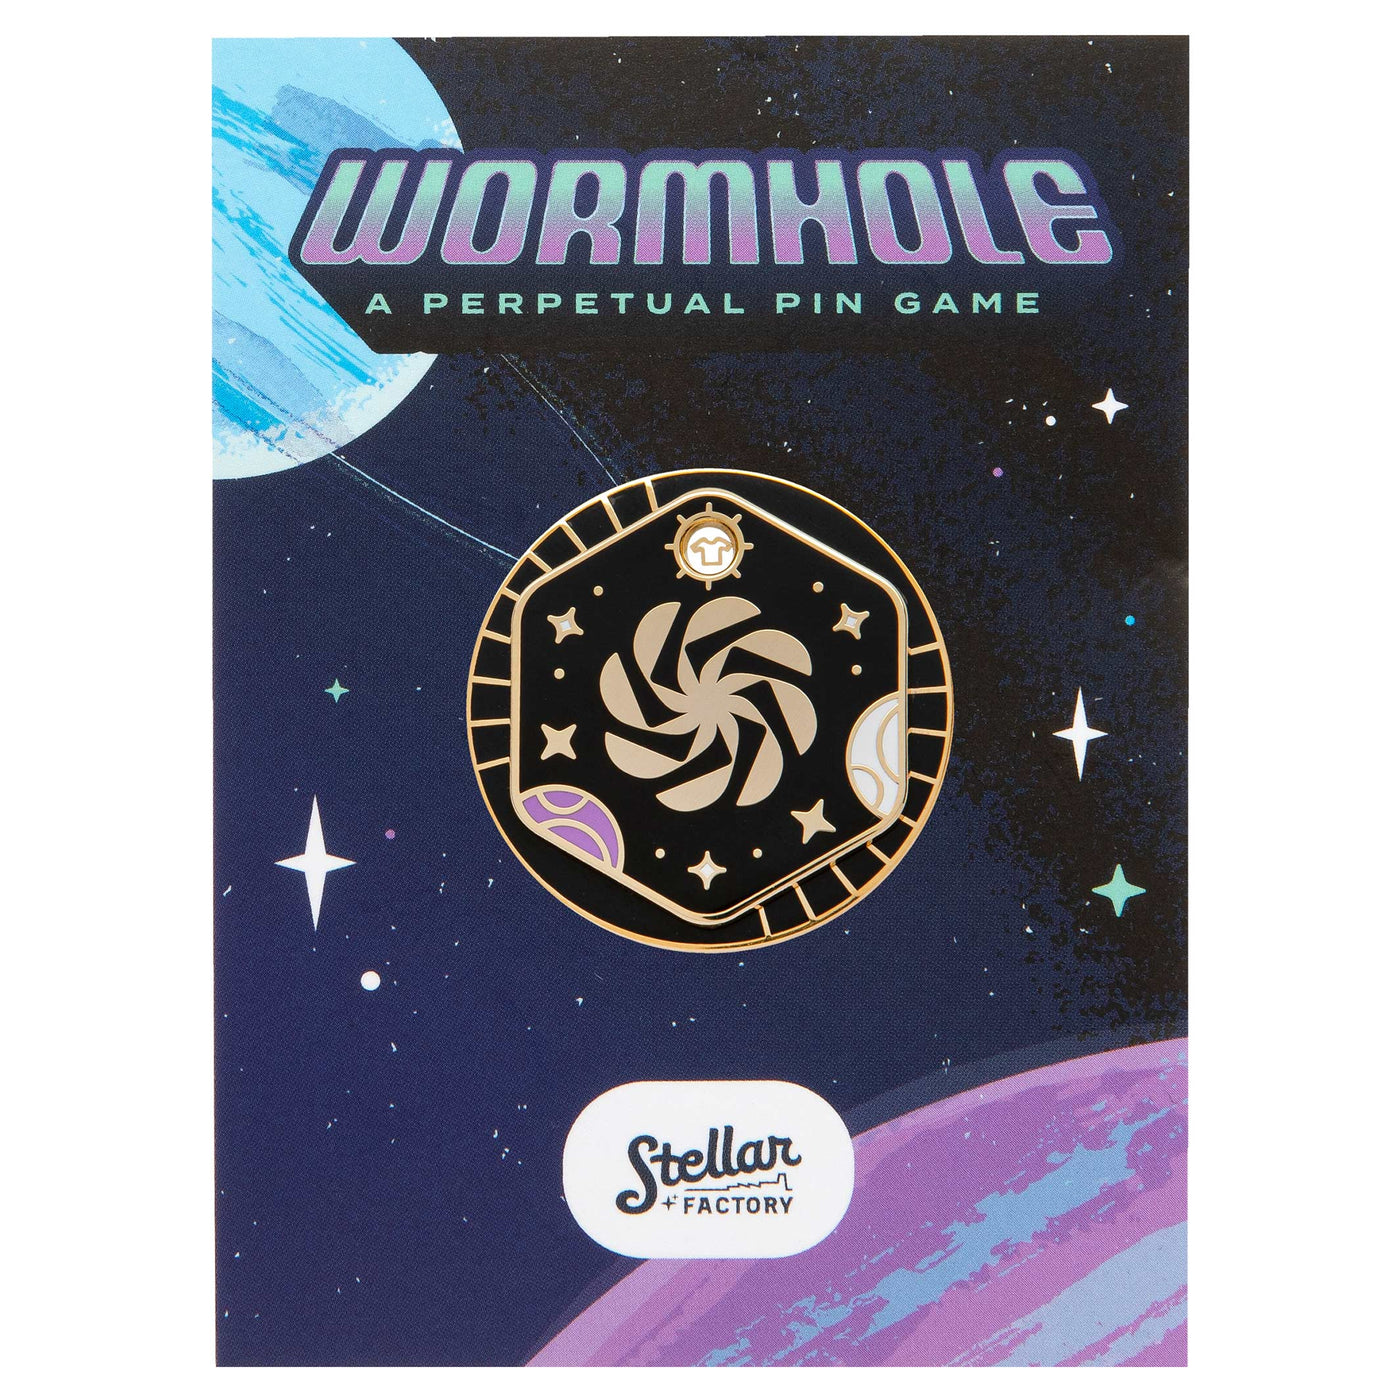 Front of Packaging for Wormhole Pin game